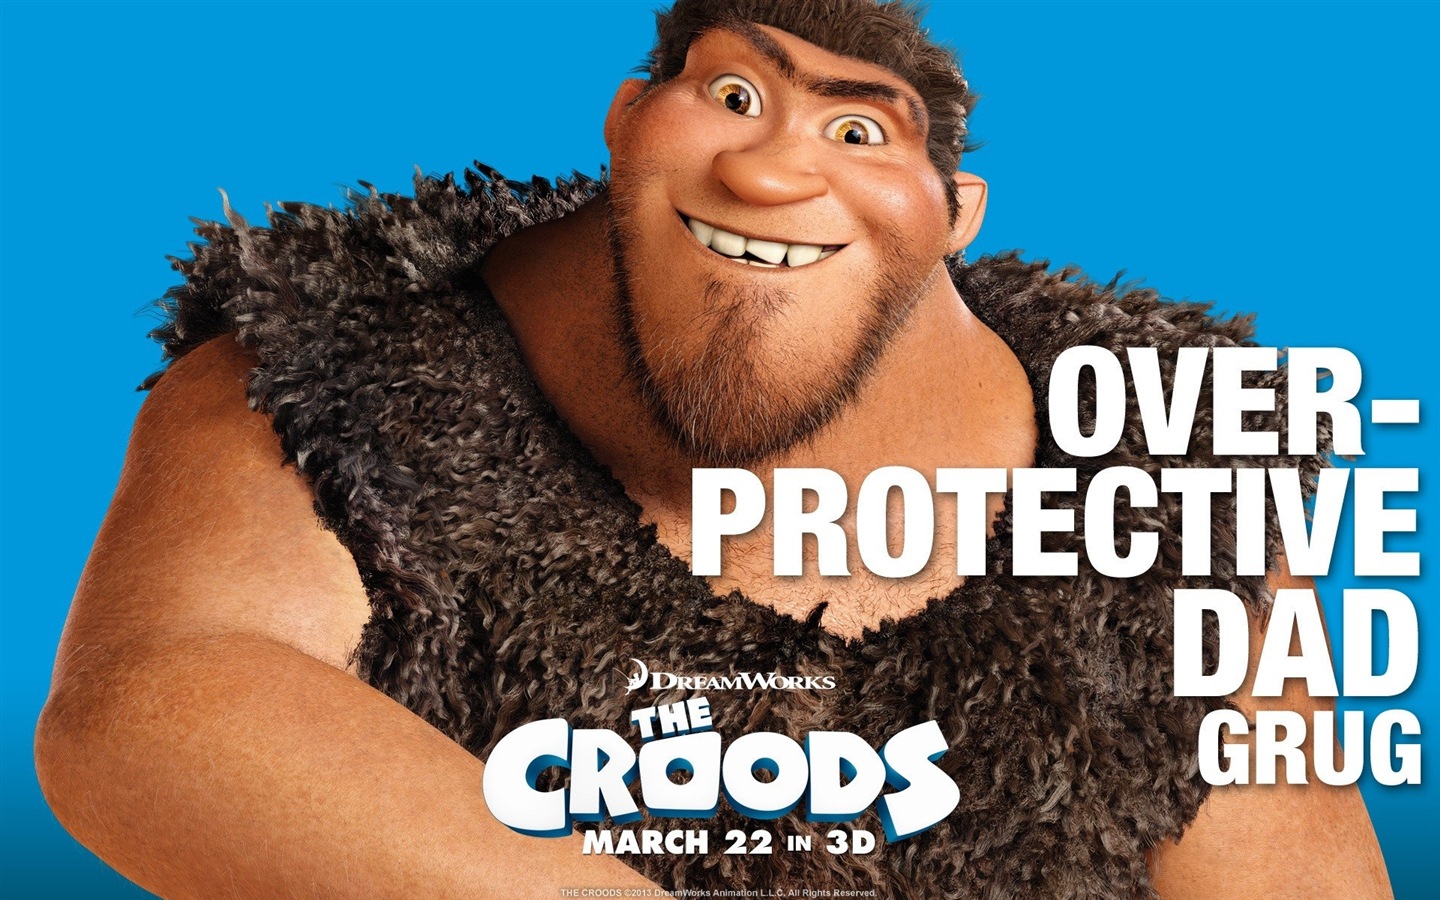 V Croods HD Movie Wallpapers #11 - 1440x900